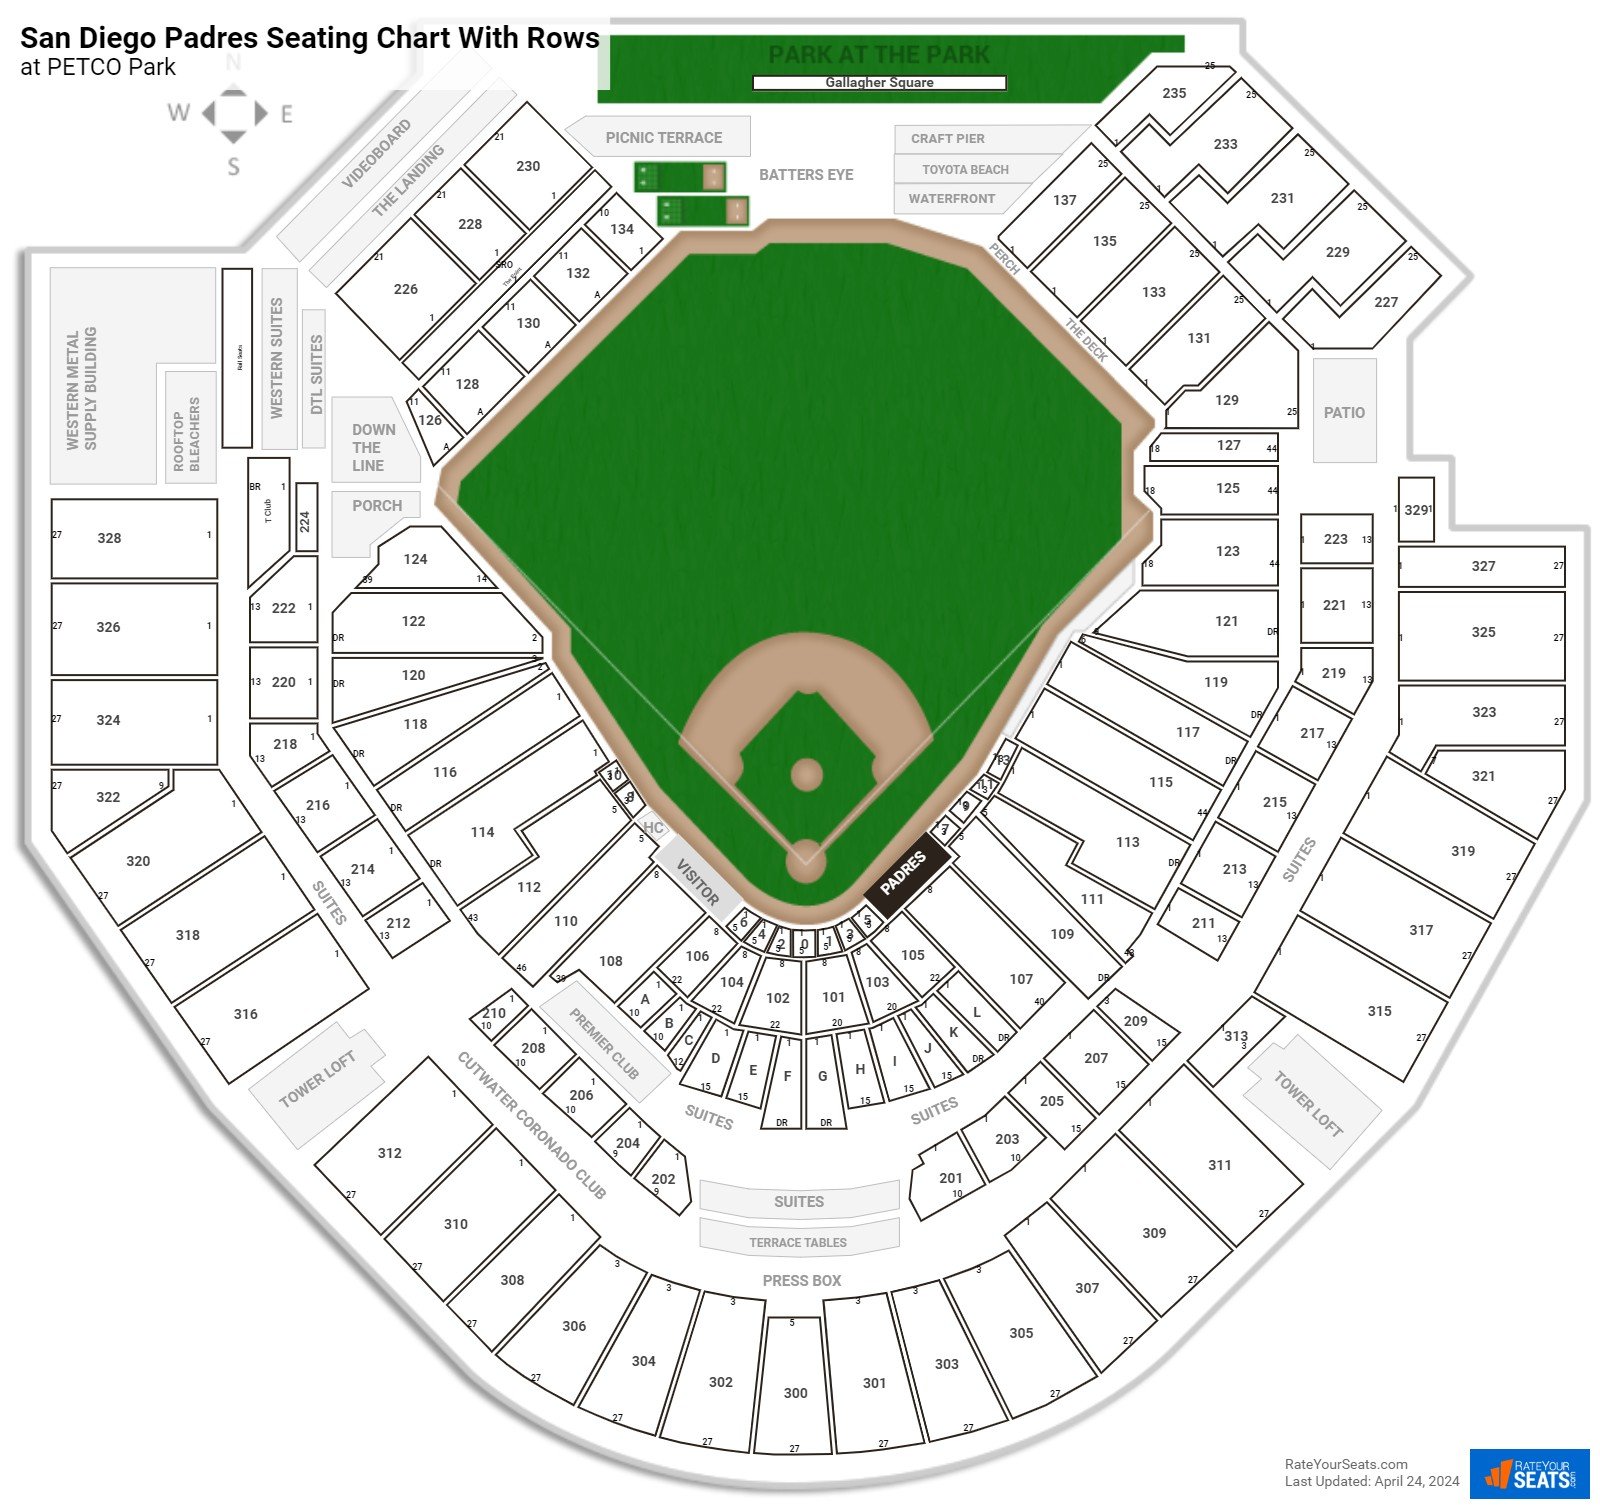 PETCO Park seating chart with row numbers